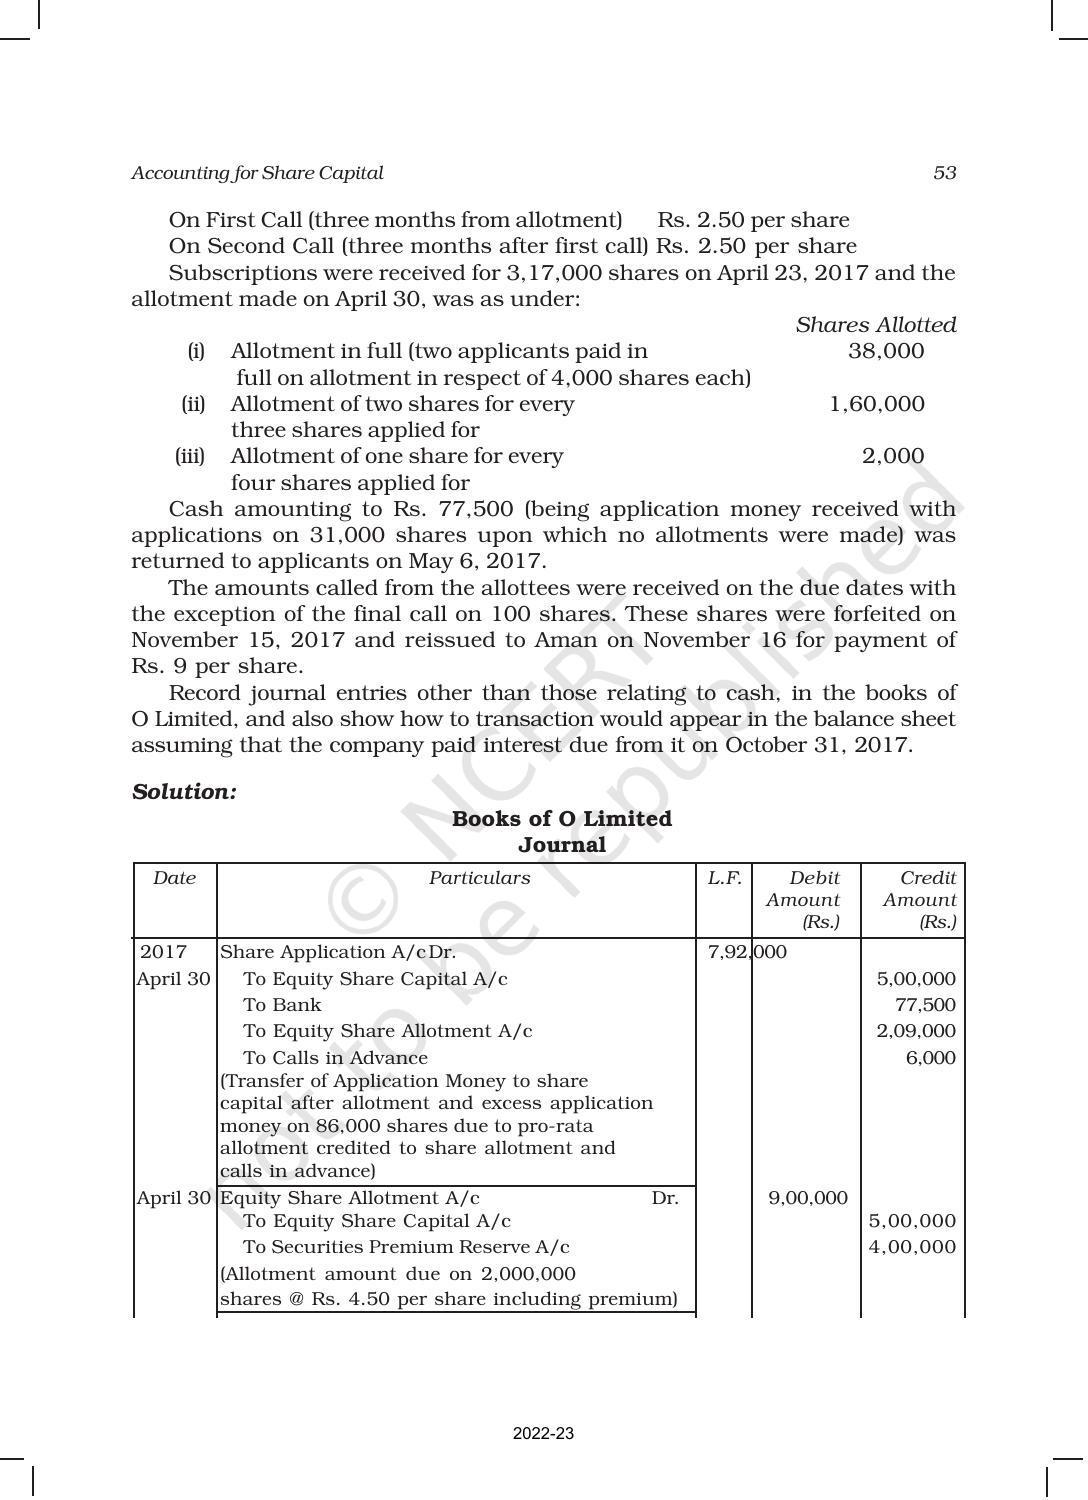 NCERT Book for Class 12 Accountancy Part II Chapter 1 Accounting for Share Capital - Page 53